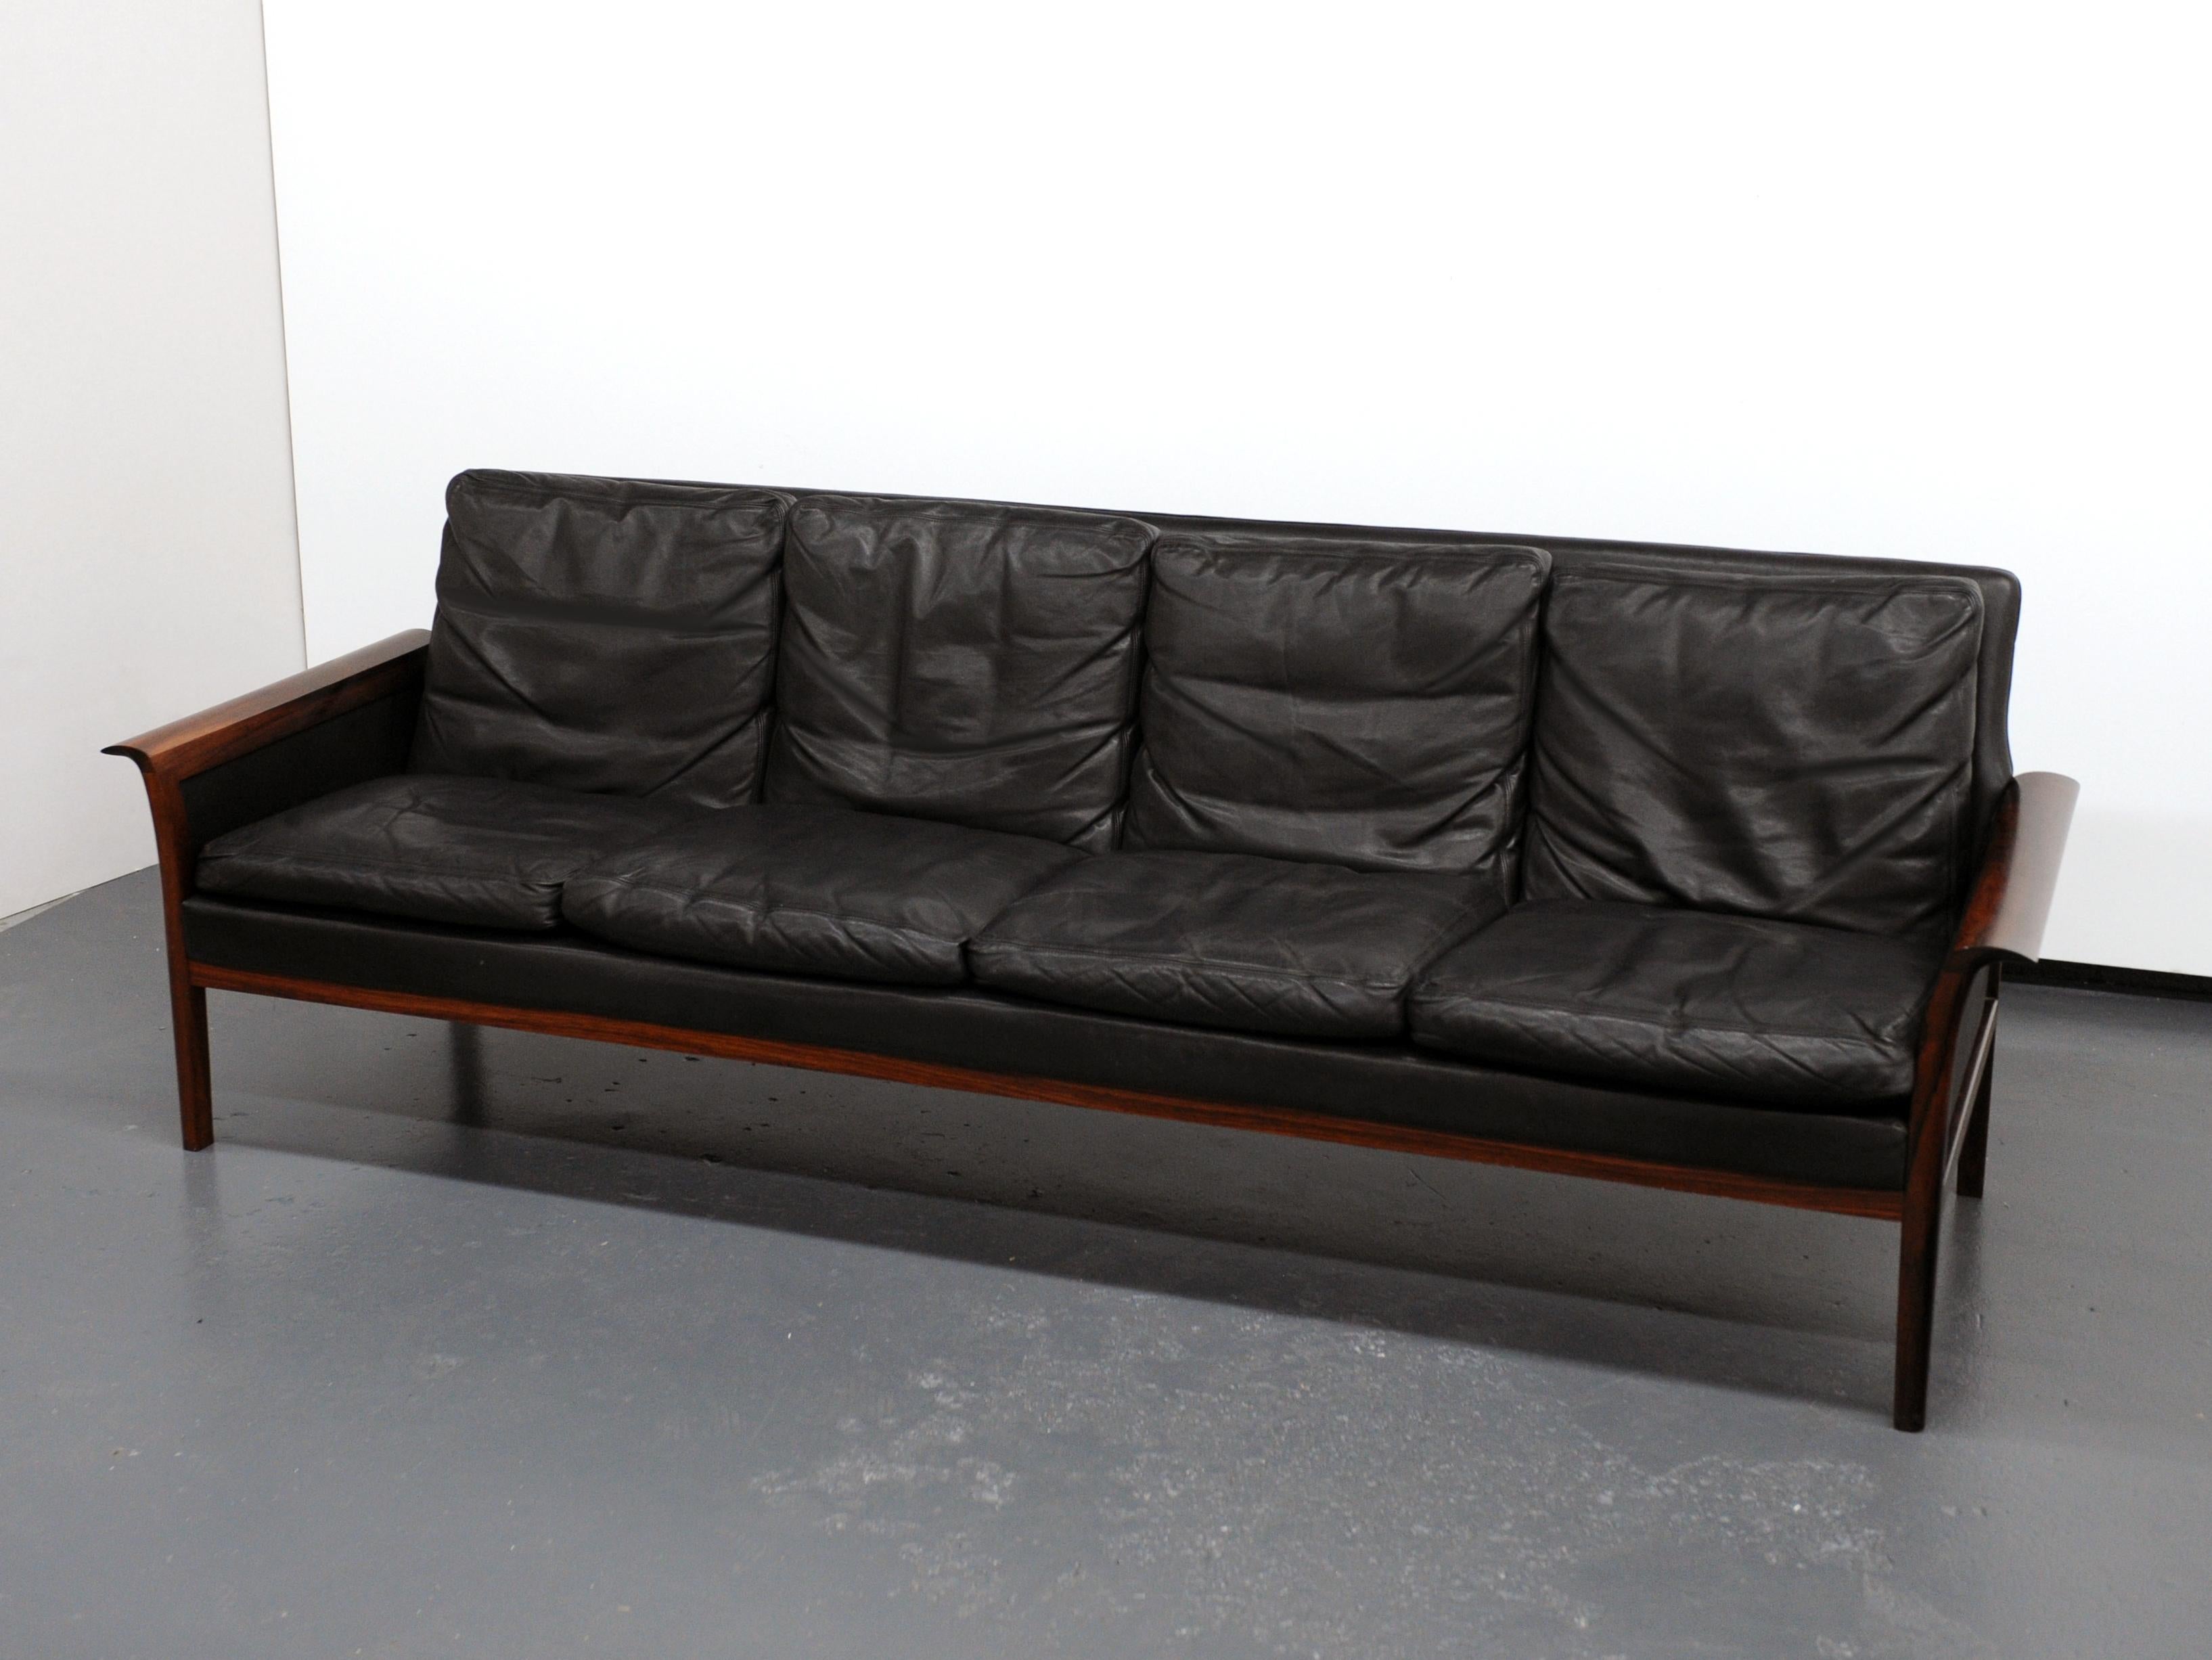 Attractive and well made four-seat sofa in black leather with solid rosewood frame. Desirable design with beautiful curved rosewood armrests. Manufactured in the 1960s by Vatne Møbler of Norway, label to underside. Soft black leather with original